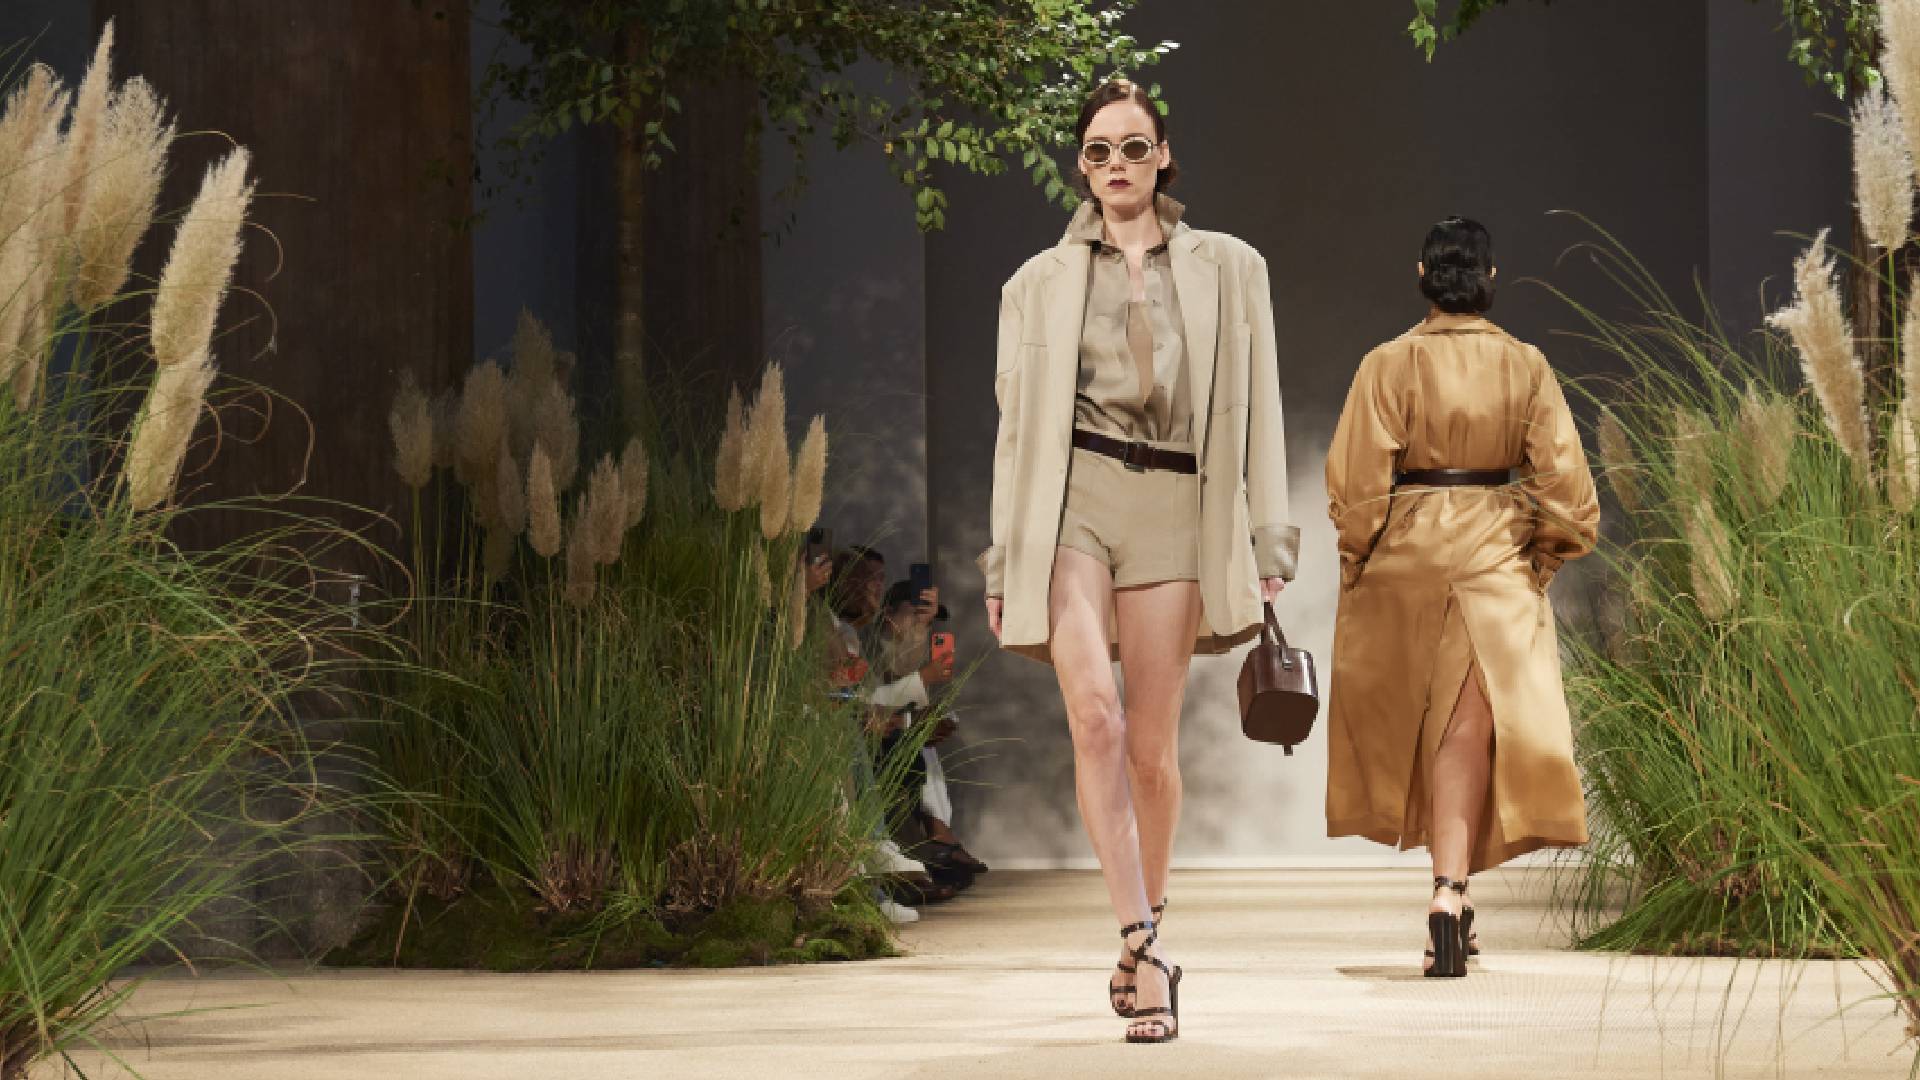 Channelling The ‘Land Girls’: Max Mara Took Inspiration From Wartime Fashion In Milan